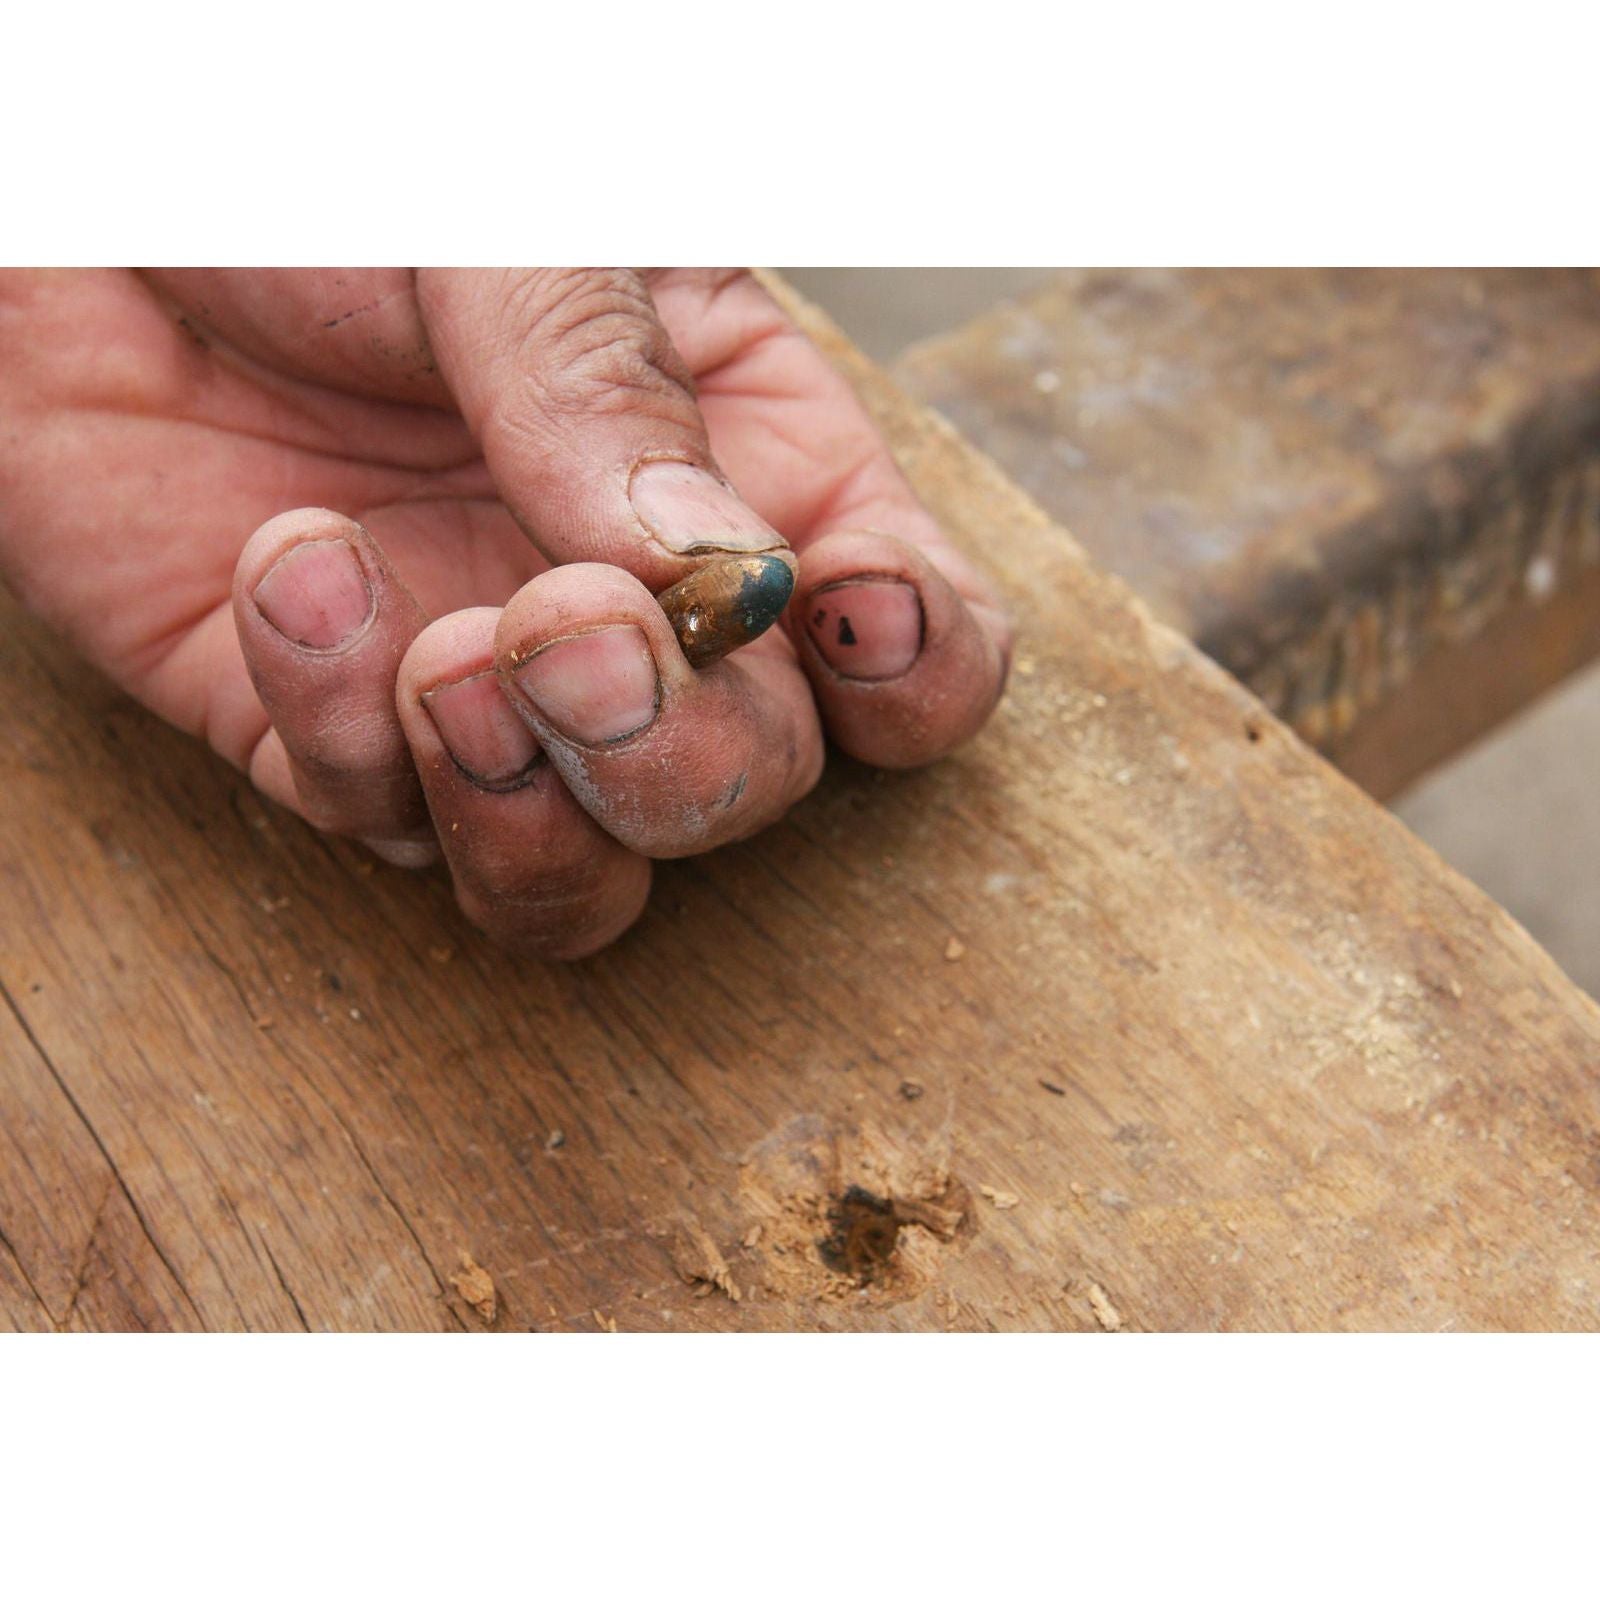 We Found an Old Bullet in Salvaged Lumber From a Church